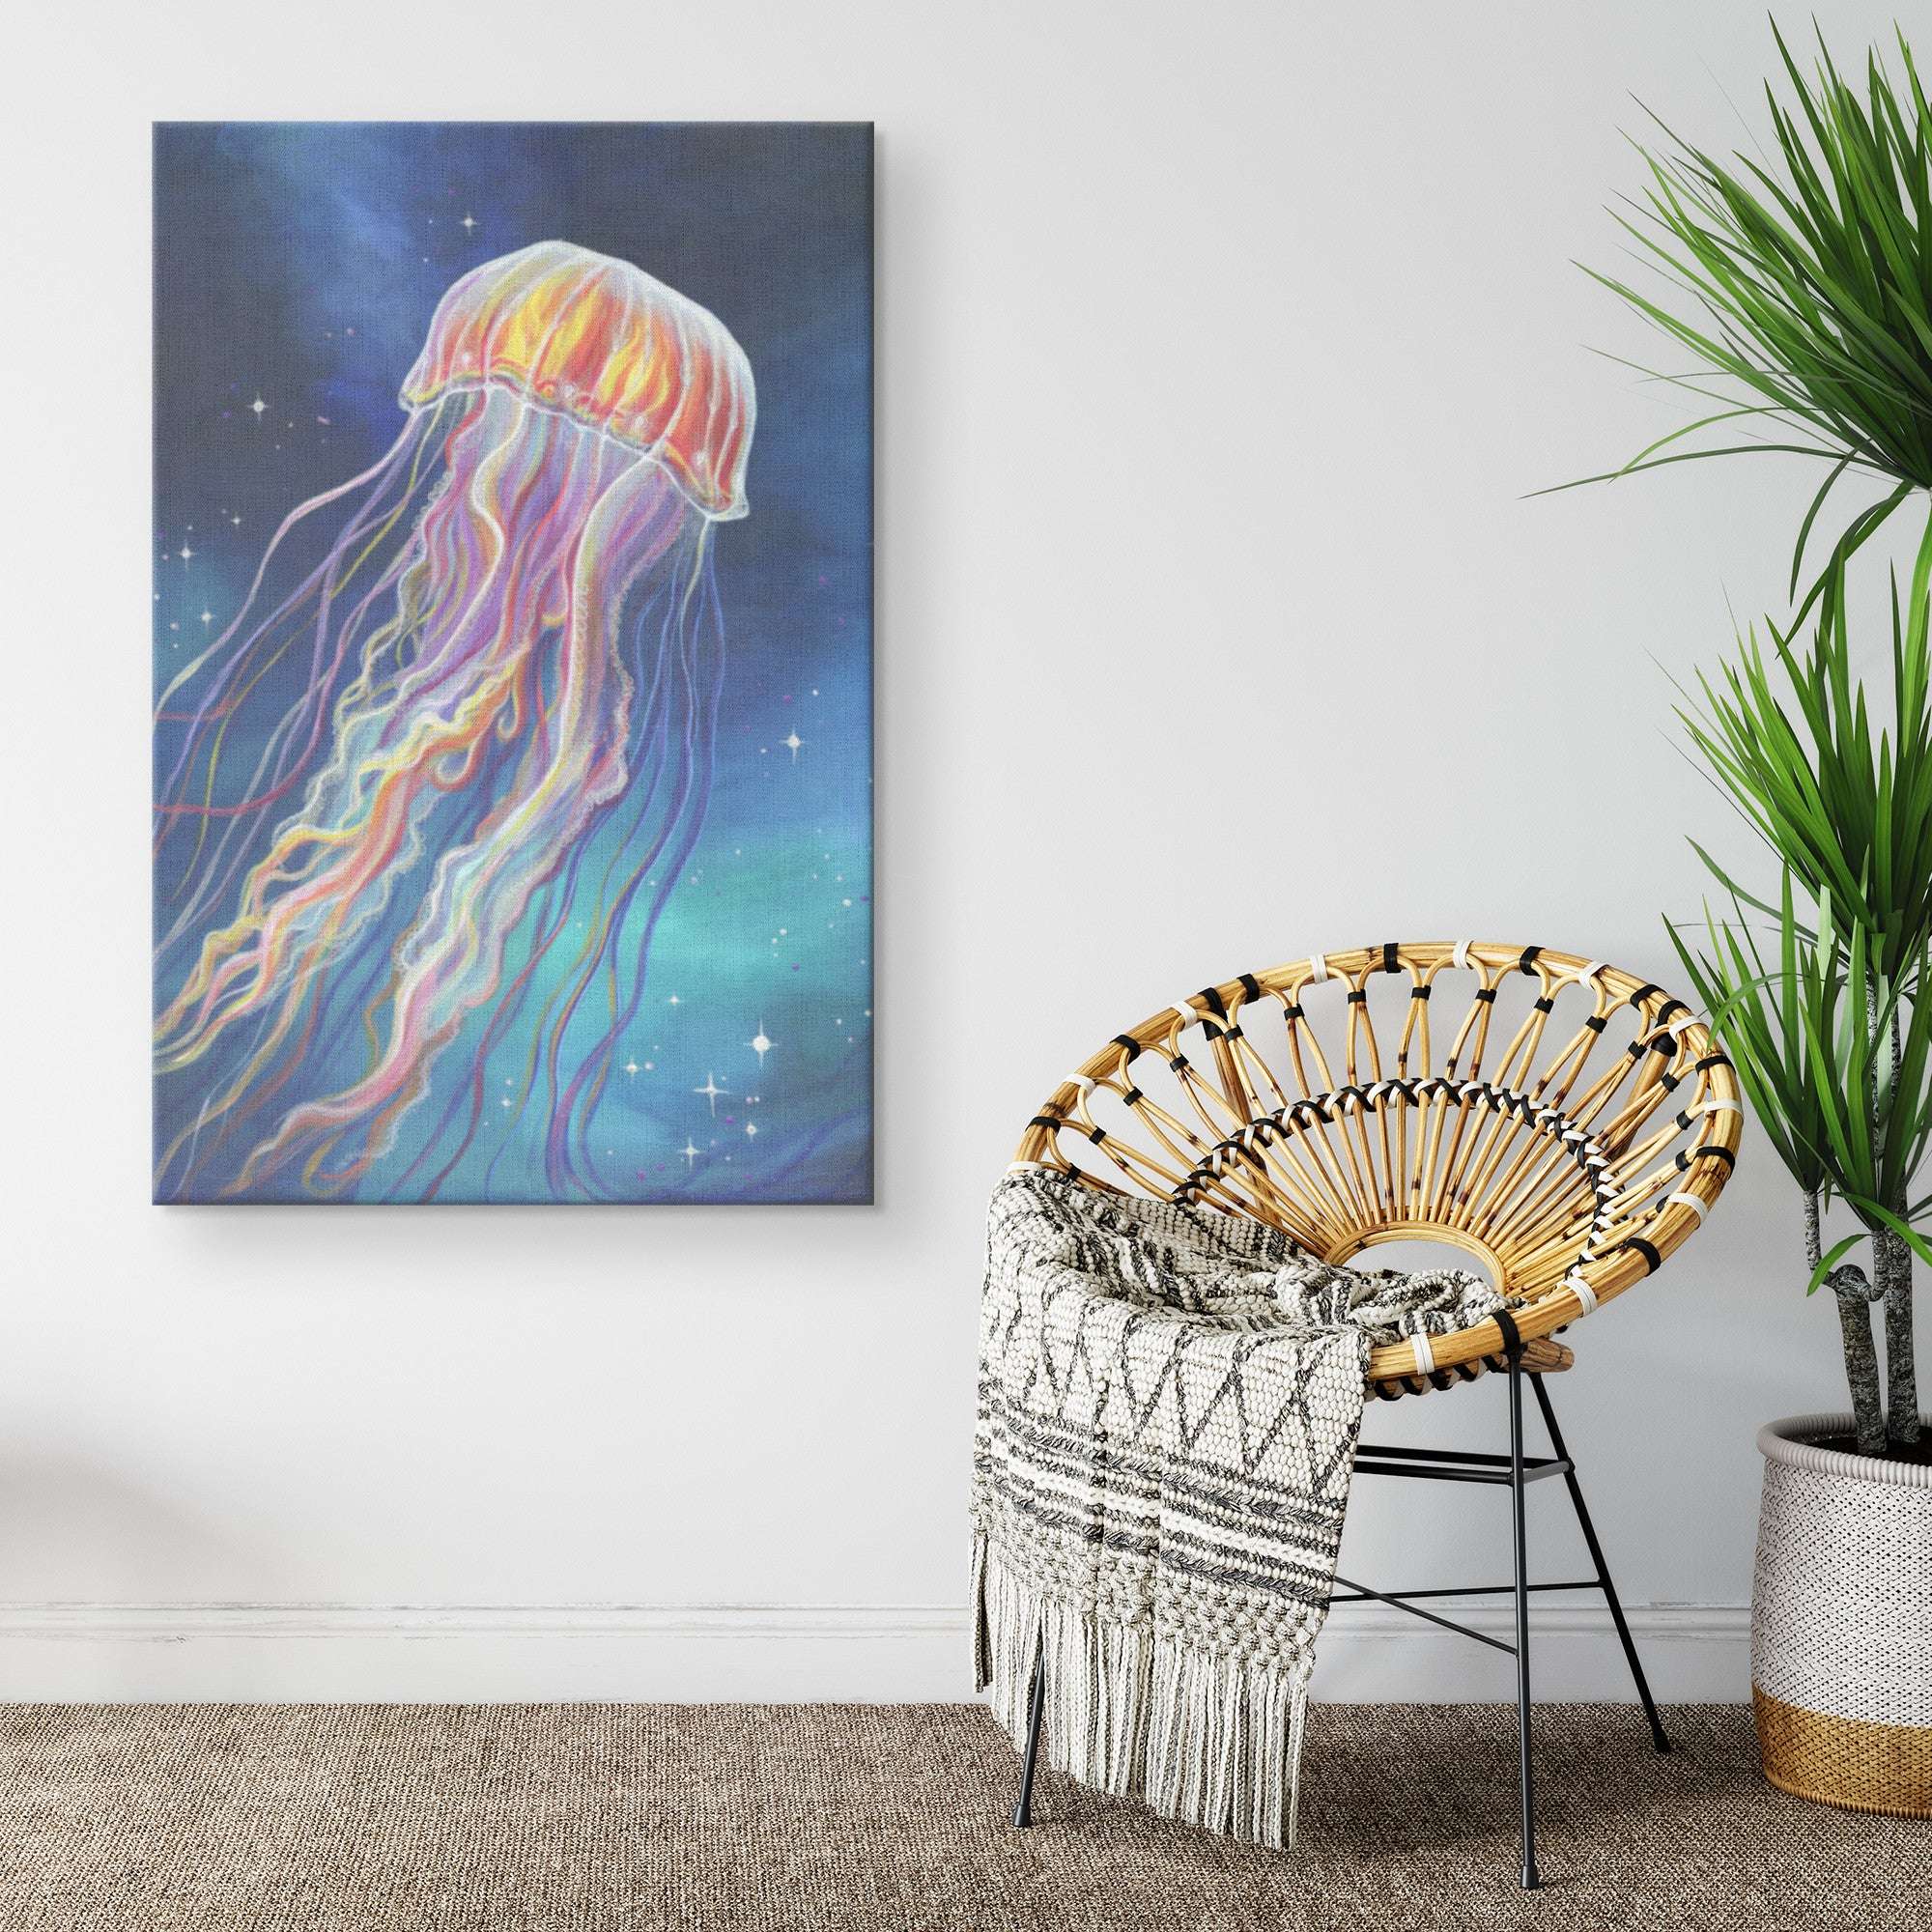 Art print of a Jellyfish Canvas Art Print on a canvas, hanging on a white wall next to a woven chair with a blanket, and a potted plant.